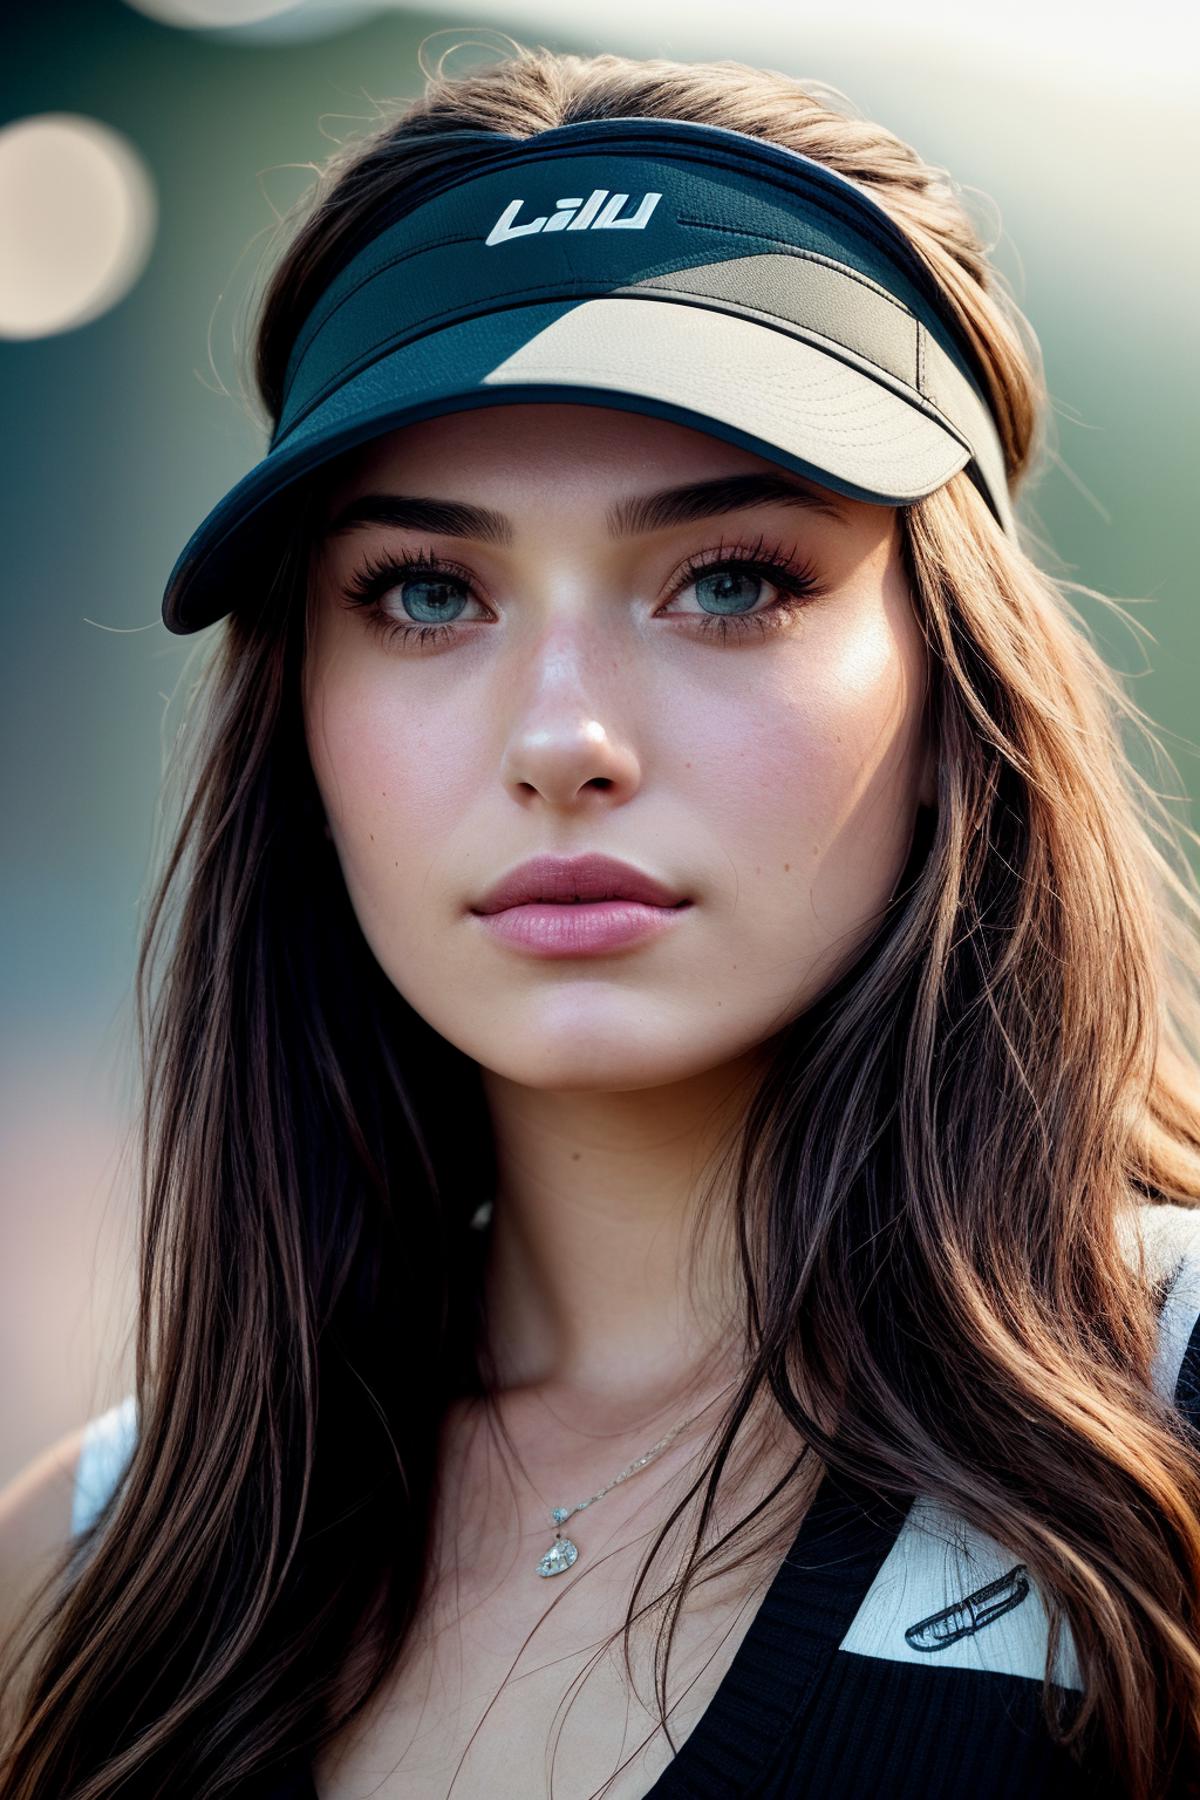 Jessica Clements image by JernauGurgeh